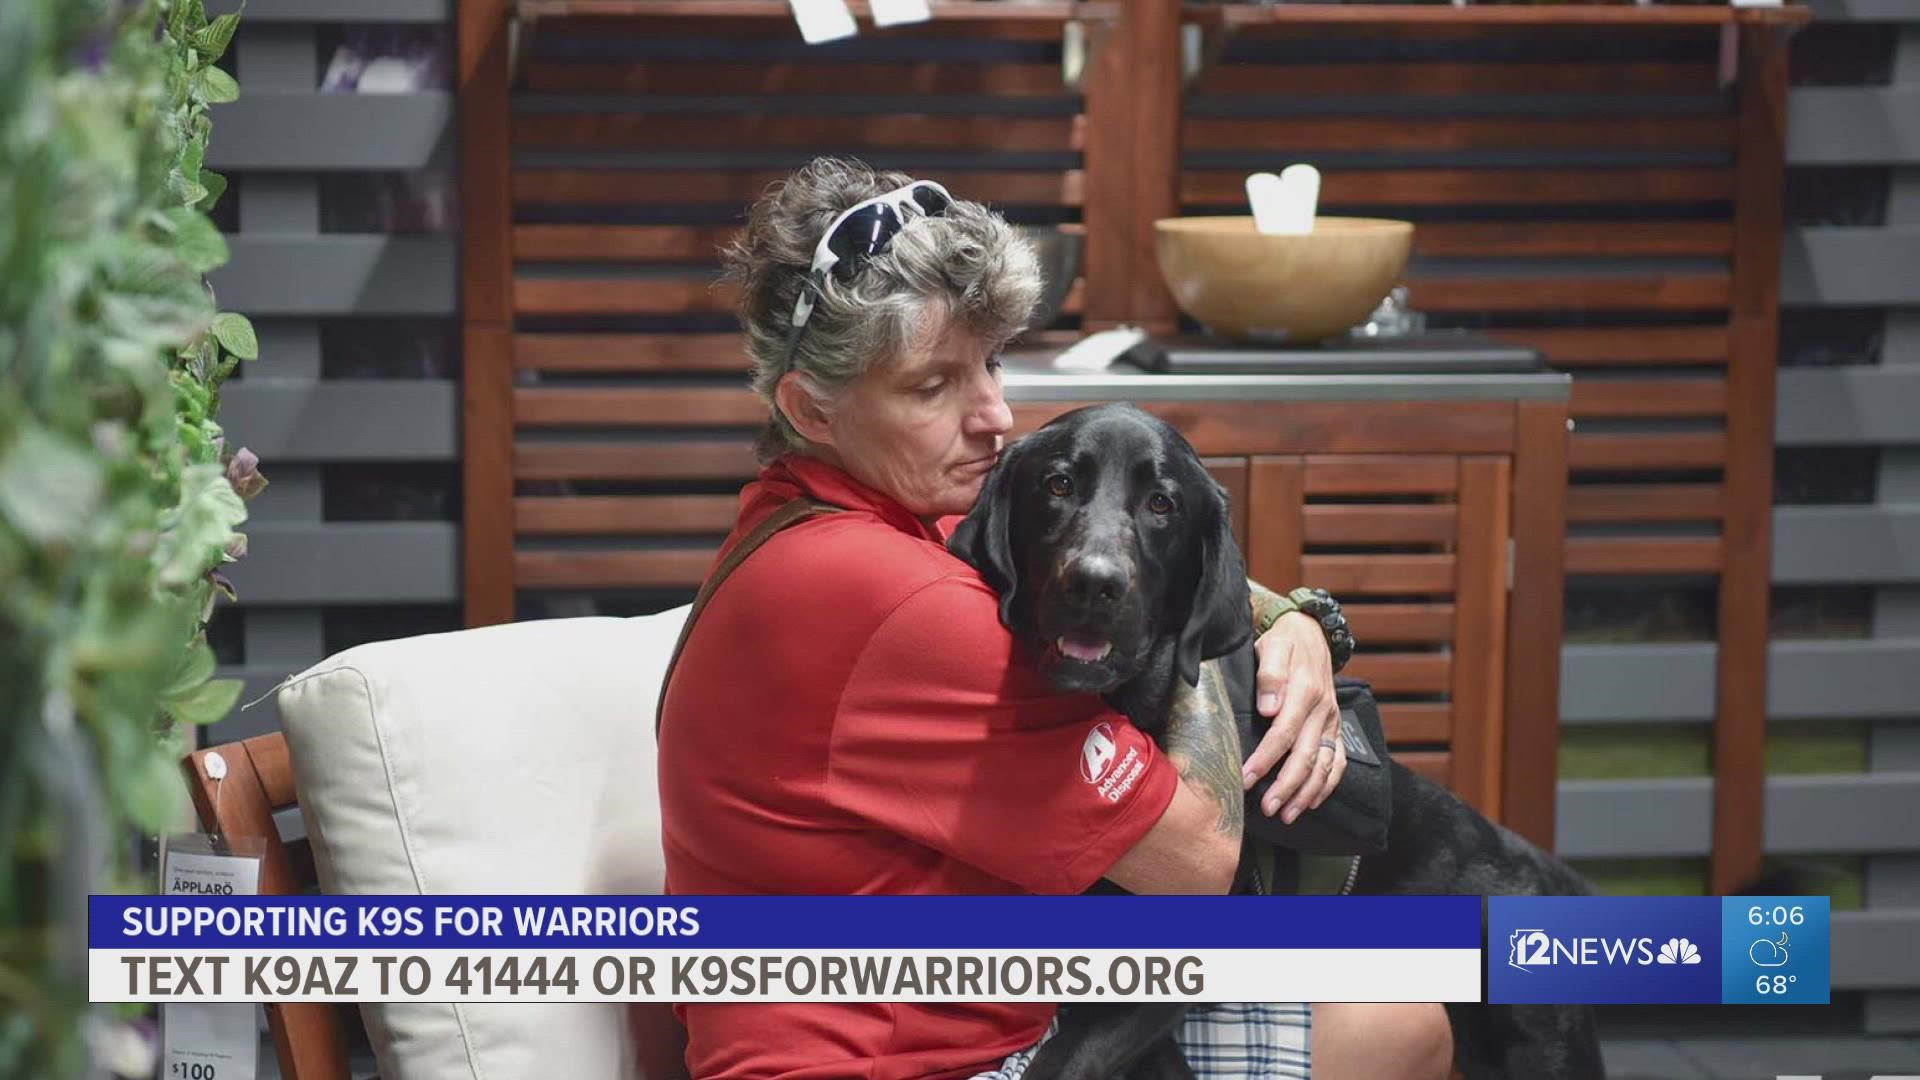 K9s for Warriors rescues dogs and gives them a new purpose – helping veterans.